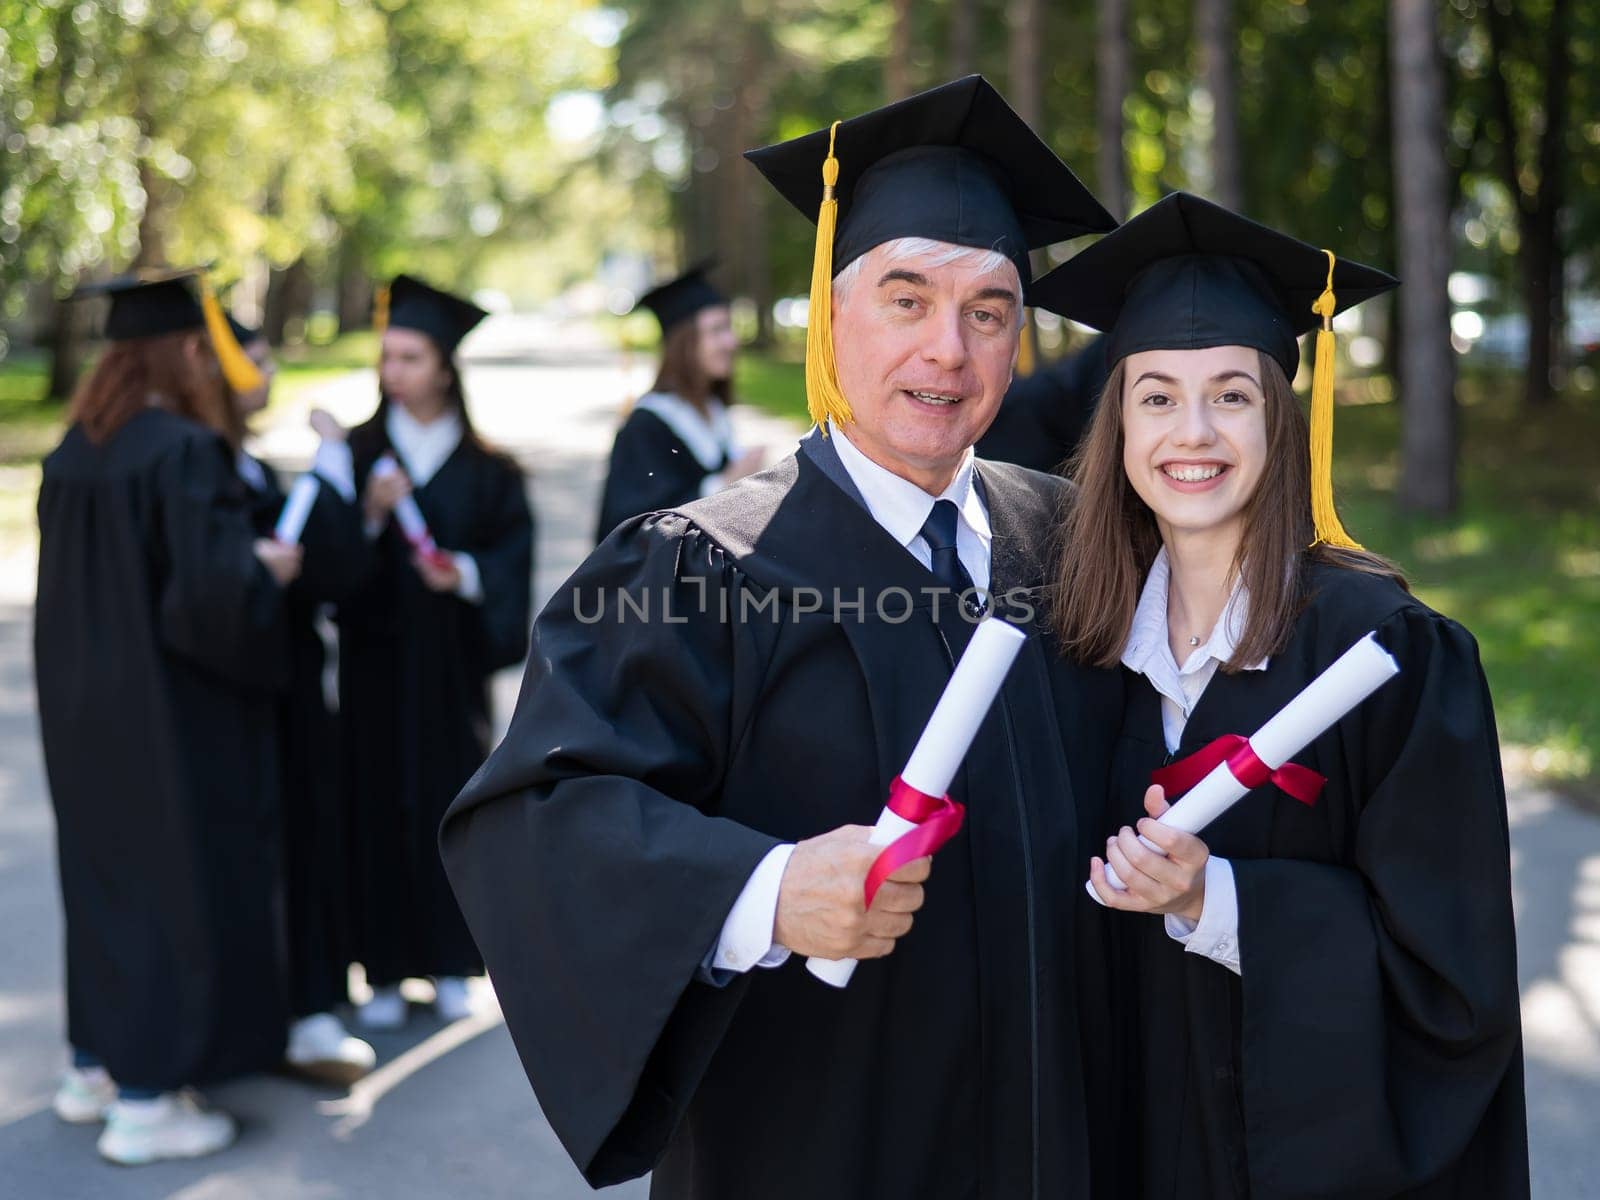 A group of graduates in robes outdoors. An elderly man and a young woman congratulate each other on their graduation. by mrwed54